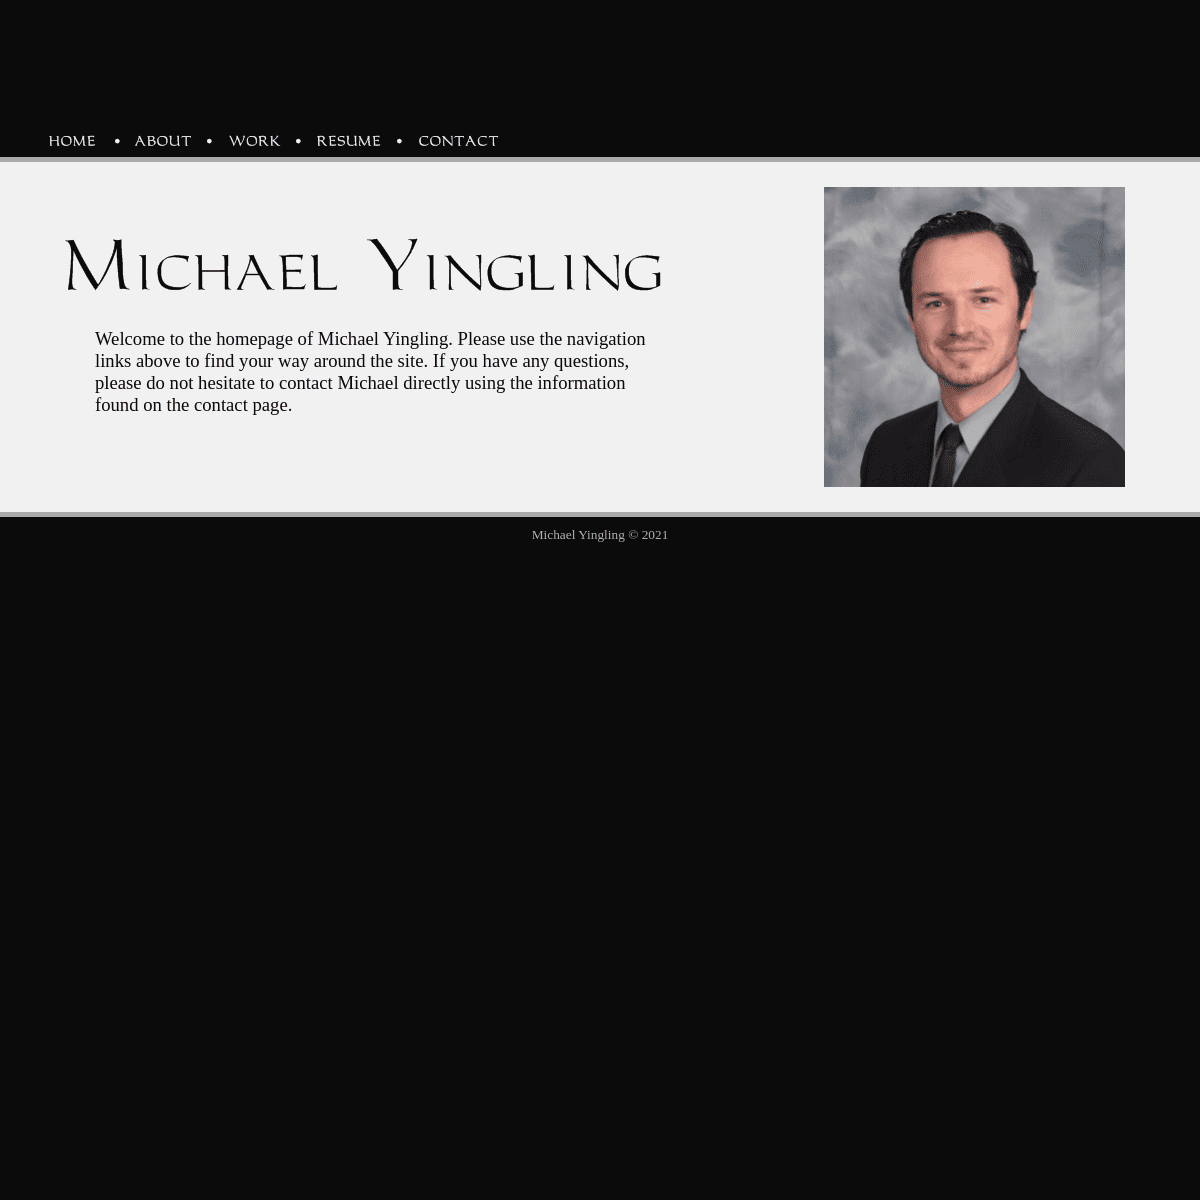 A complete backup of https://michaelyingling.com